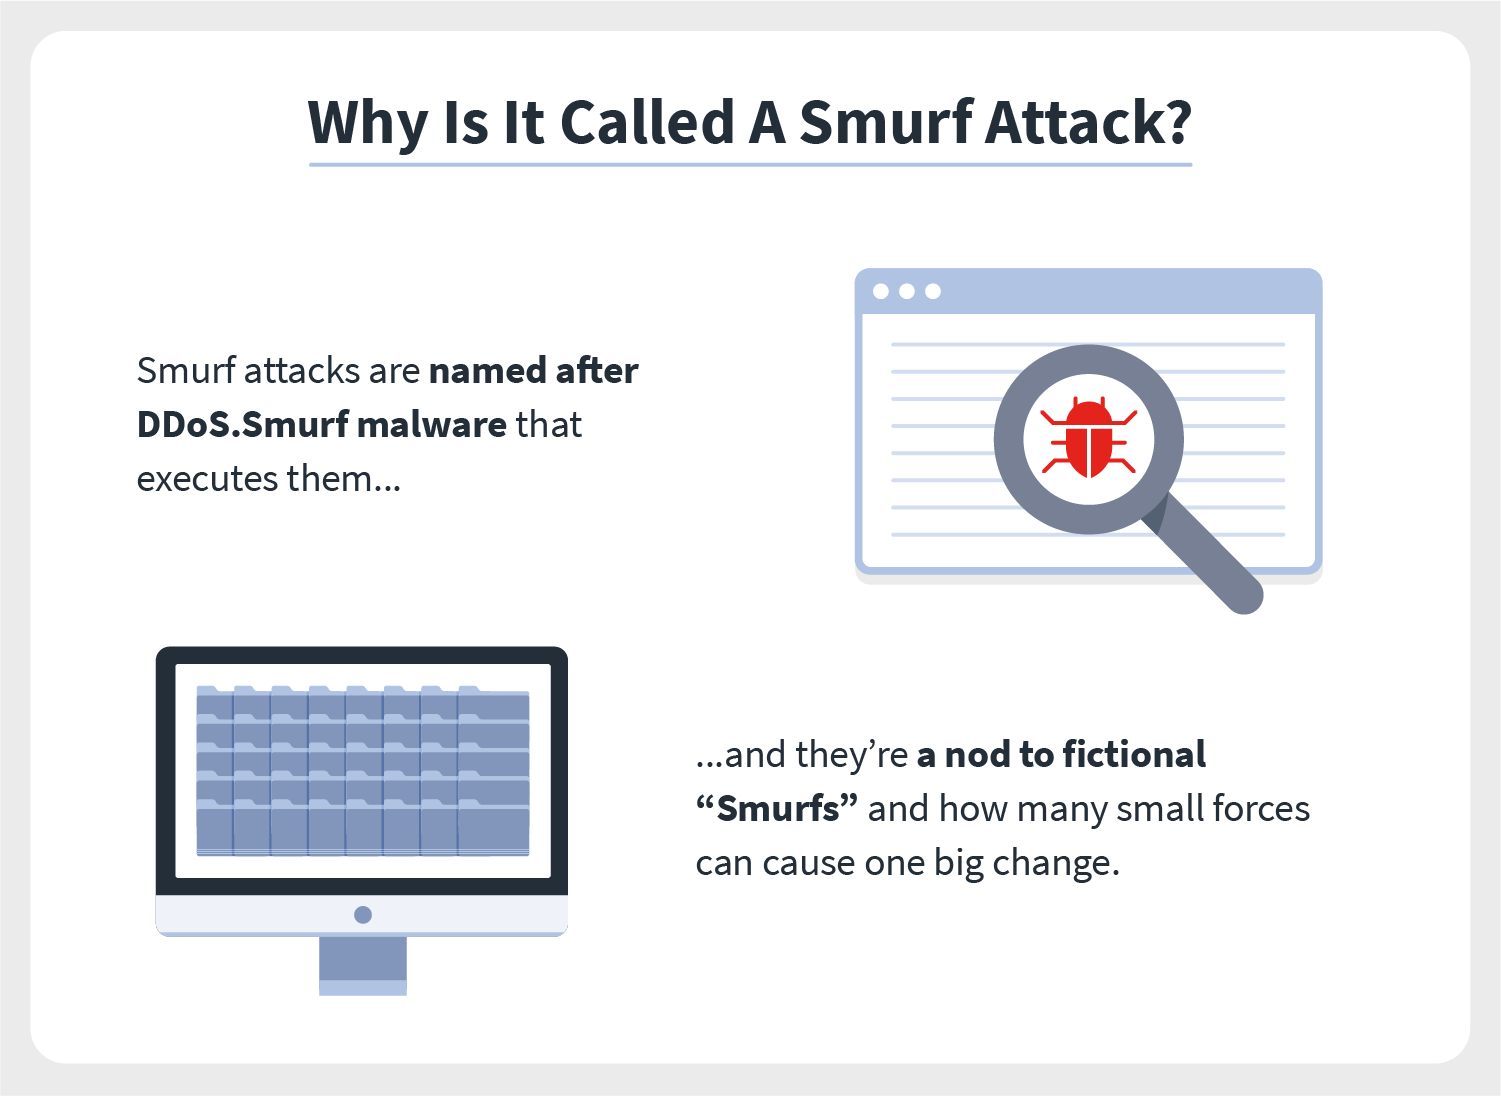 a magnifying glass hovers over a bug on a computer screen, indicating a type of malware has been identified and it could be a smurf attack